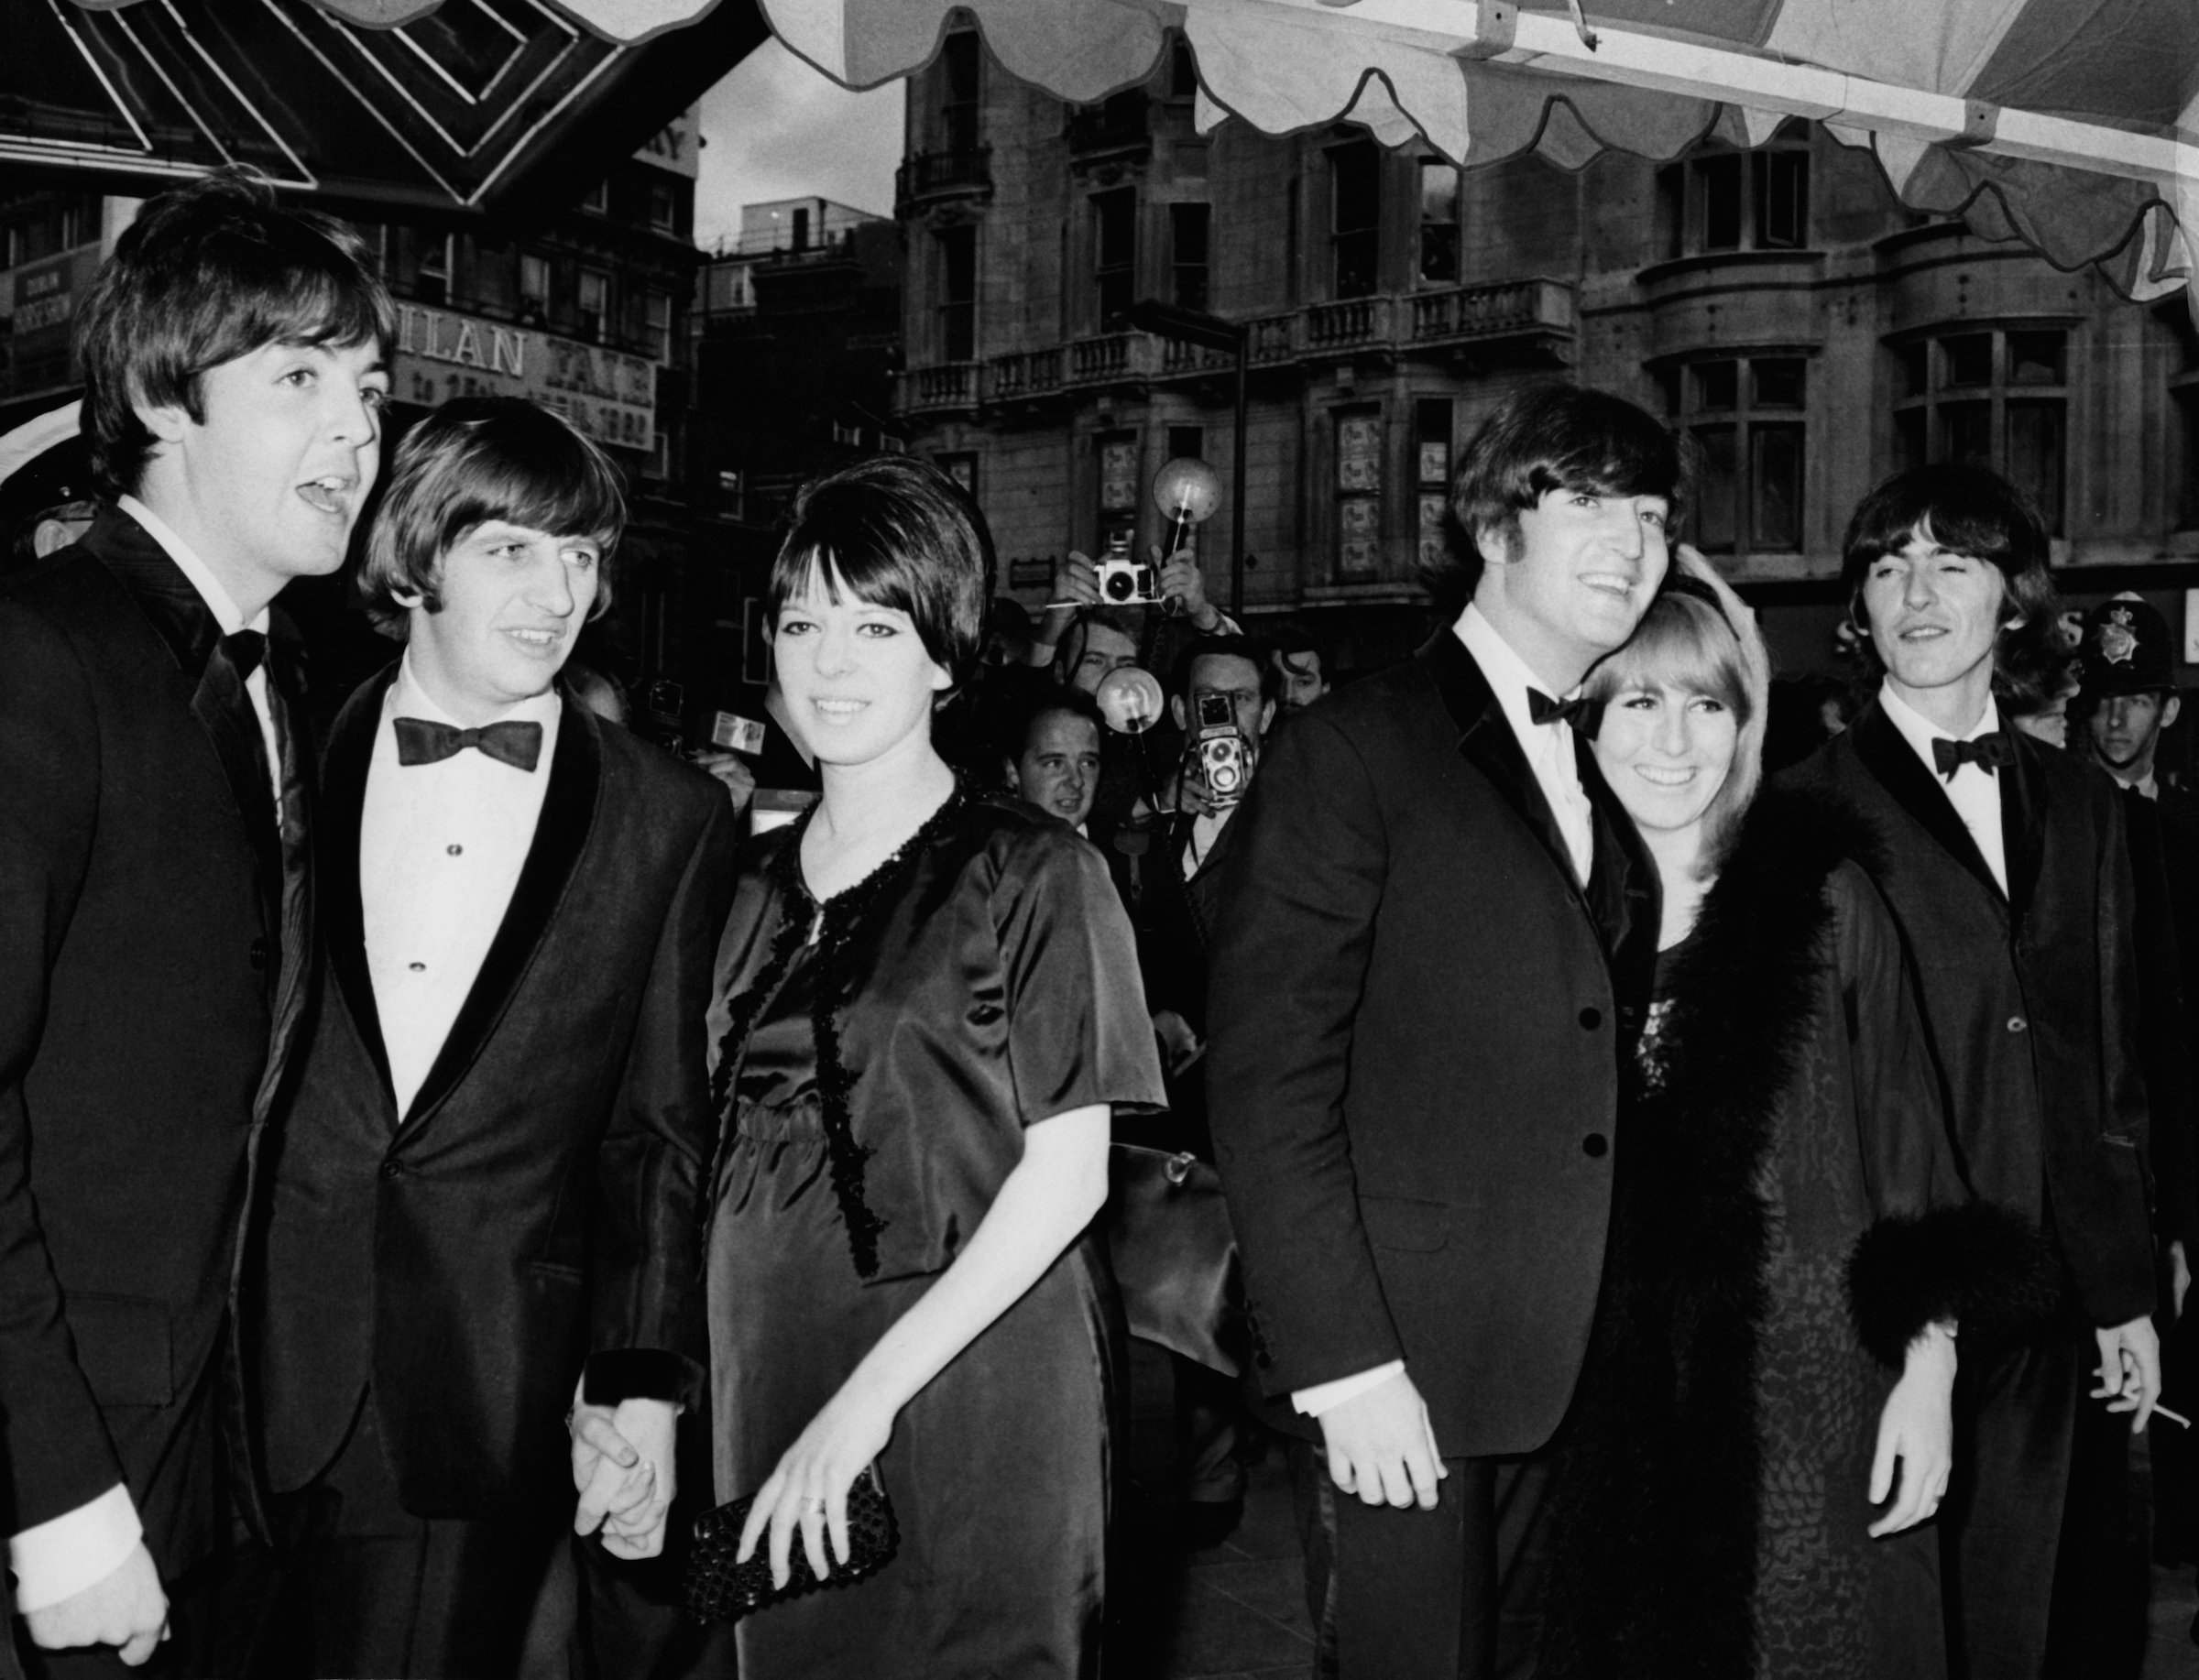 The Beatles, left to right, Paul McCartney, Ringo Starr with his wife Maureen, John Lennon with wife Cynthia and George Harrison